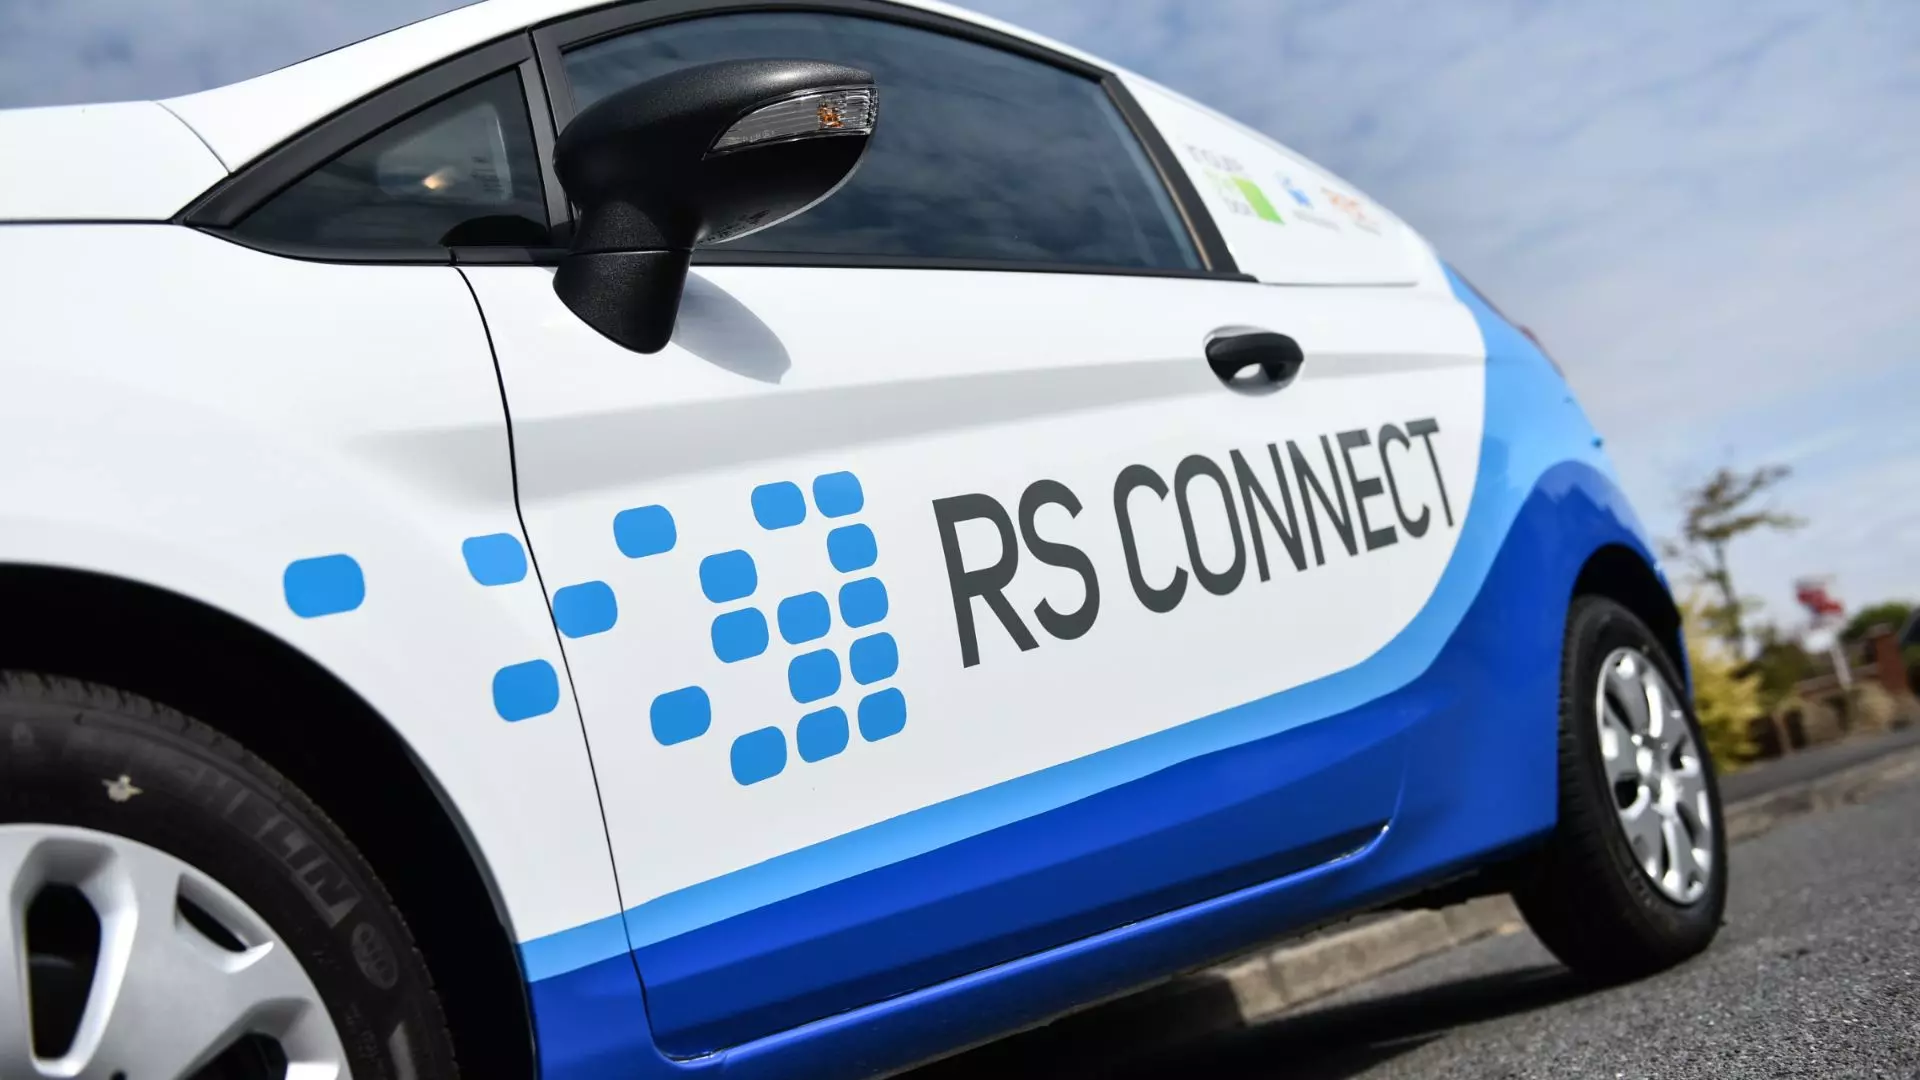 RS Connect Ford van